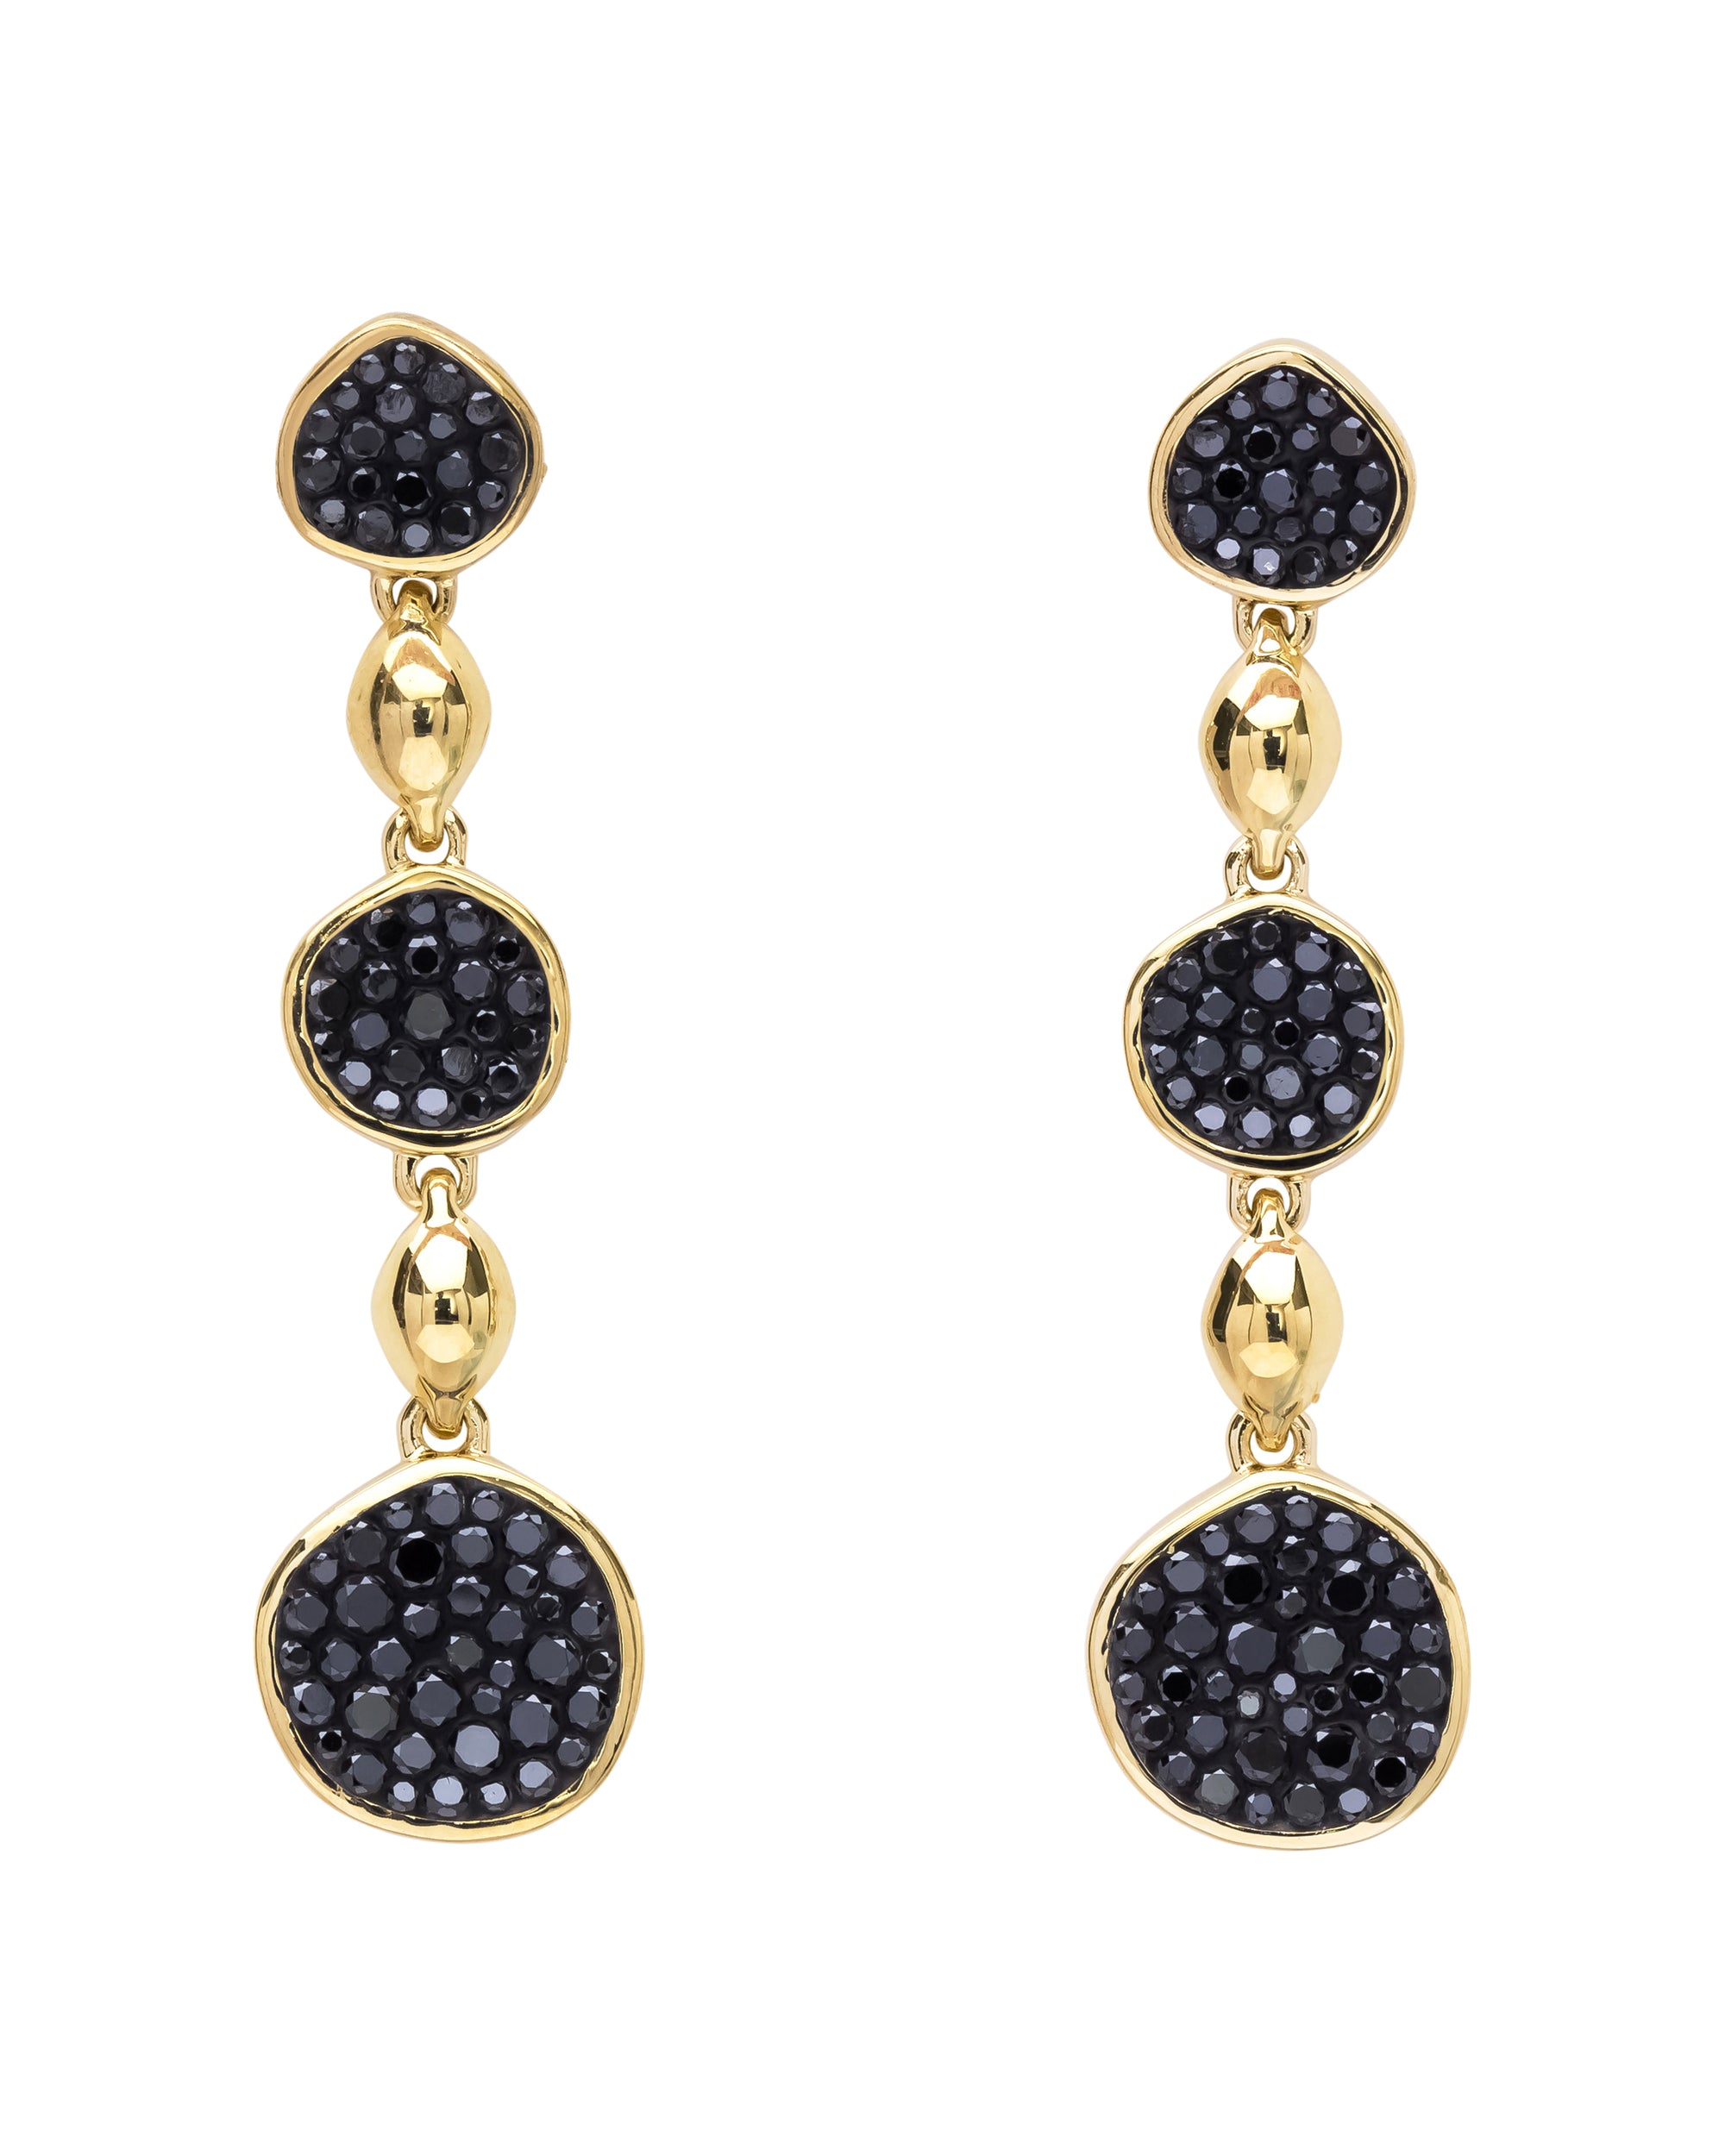 Black Diamond Pebble Drop Earrings by Pleve available at Talisman Collection Fine Jewelers in El Dorado Hills, CA and online. Specs: 1.25 cts black diamonds, 18k yellow gold  